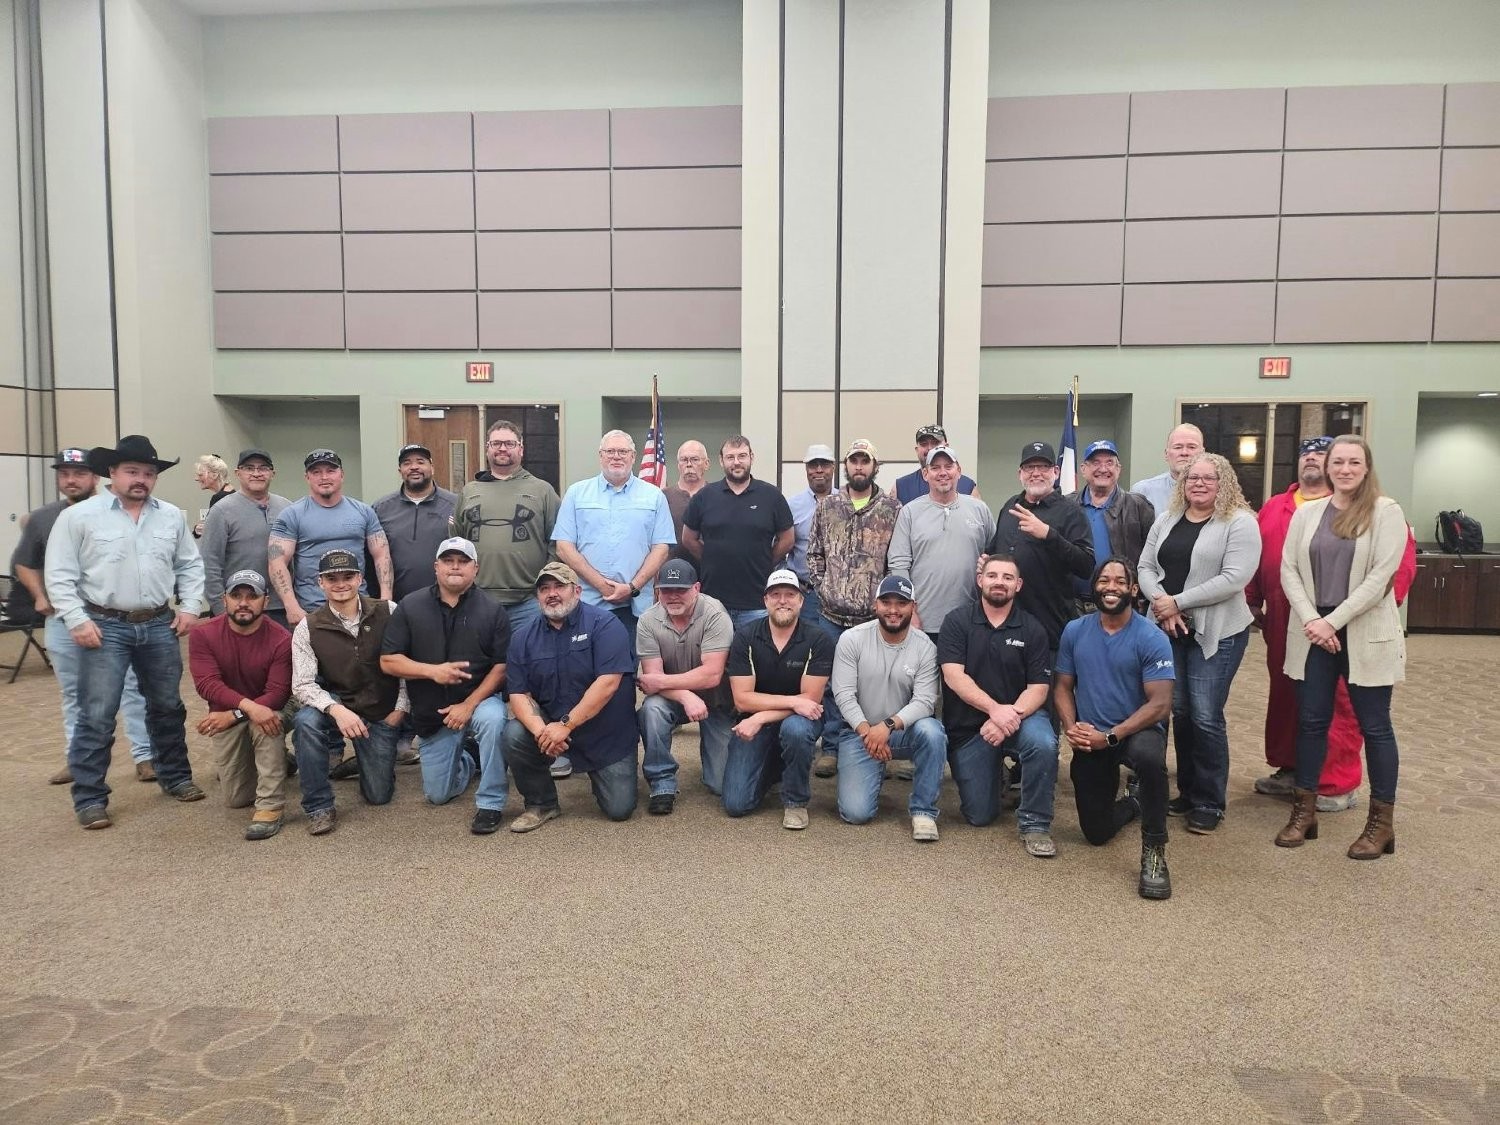 Every year, Atlas Energy puts on a Veterans Day Banquet for its employees in West Texas